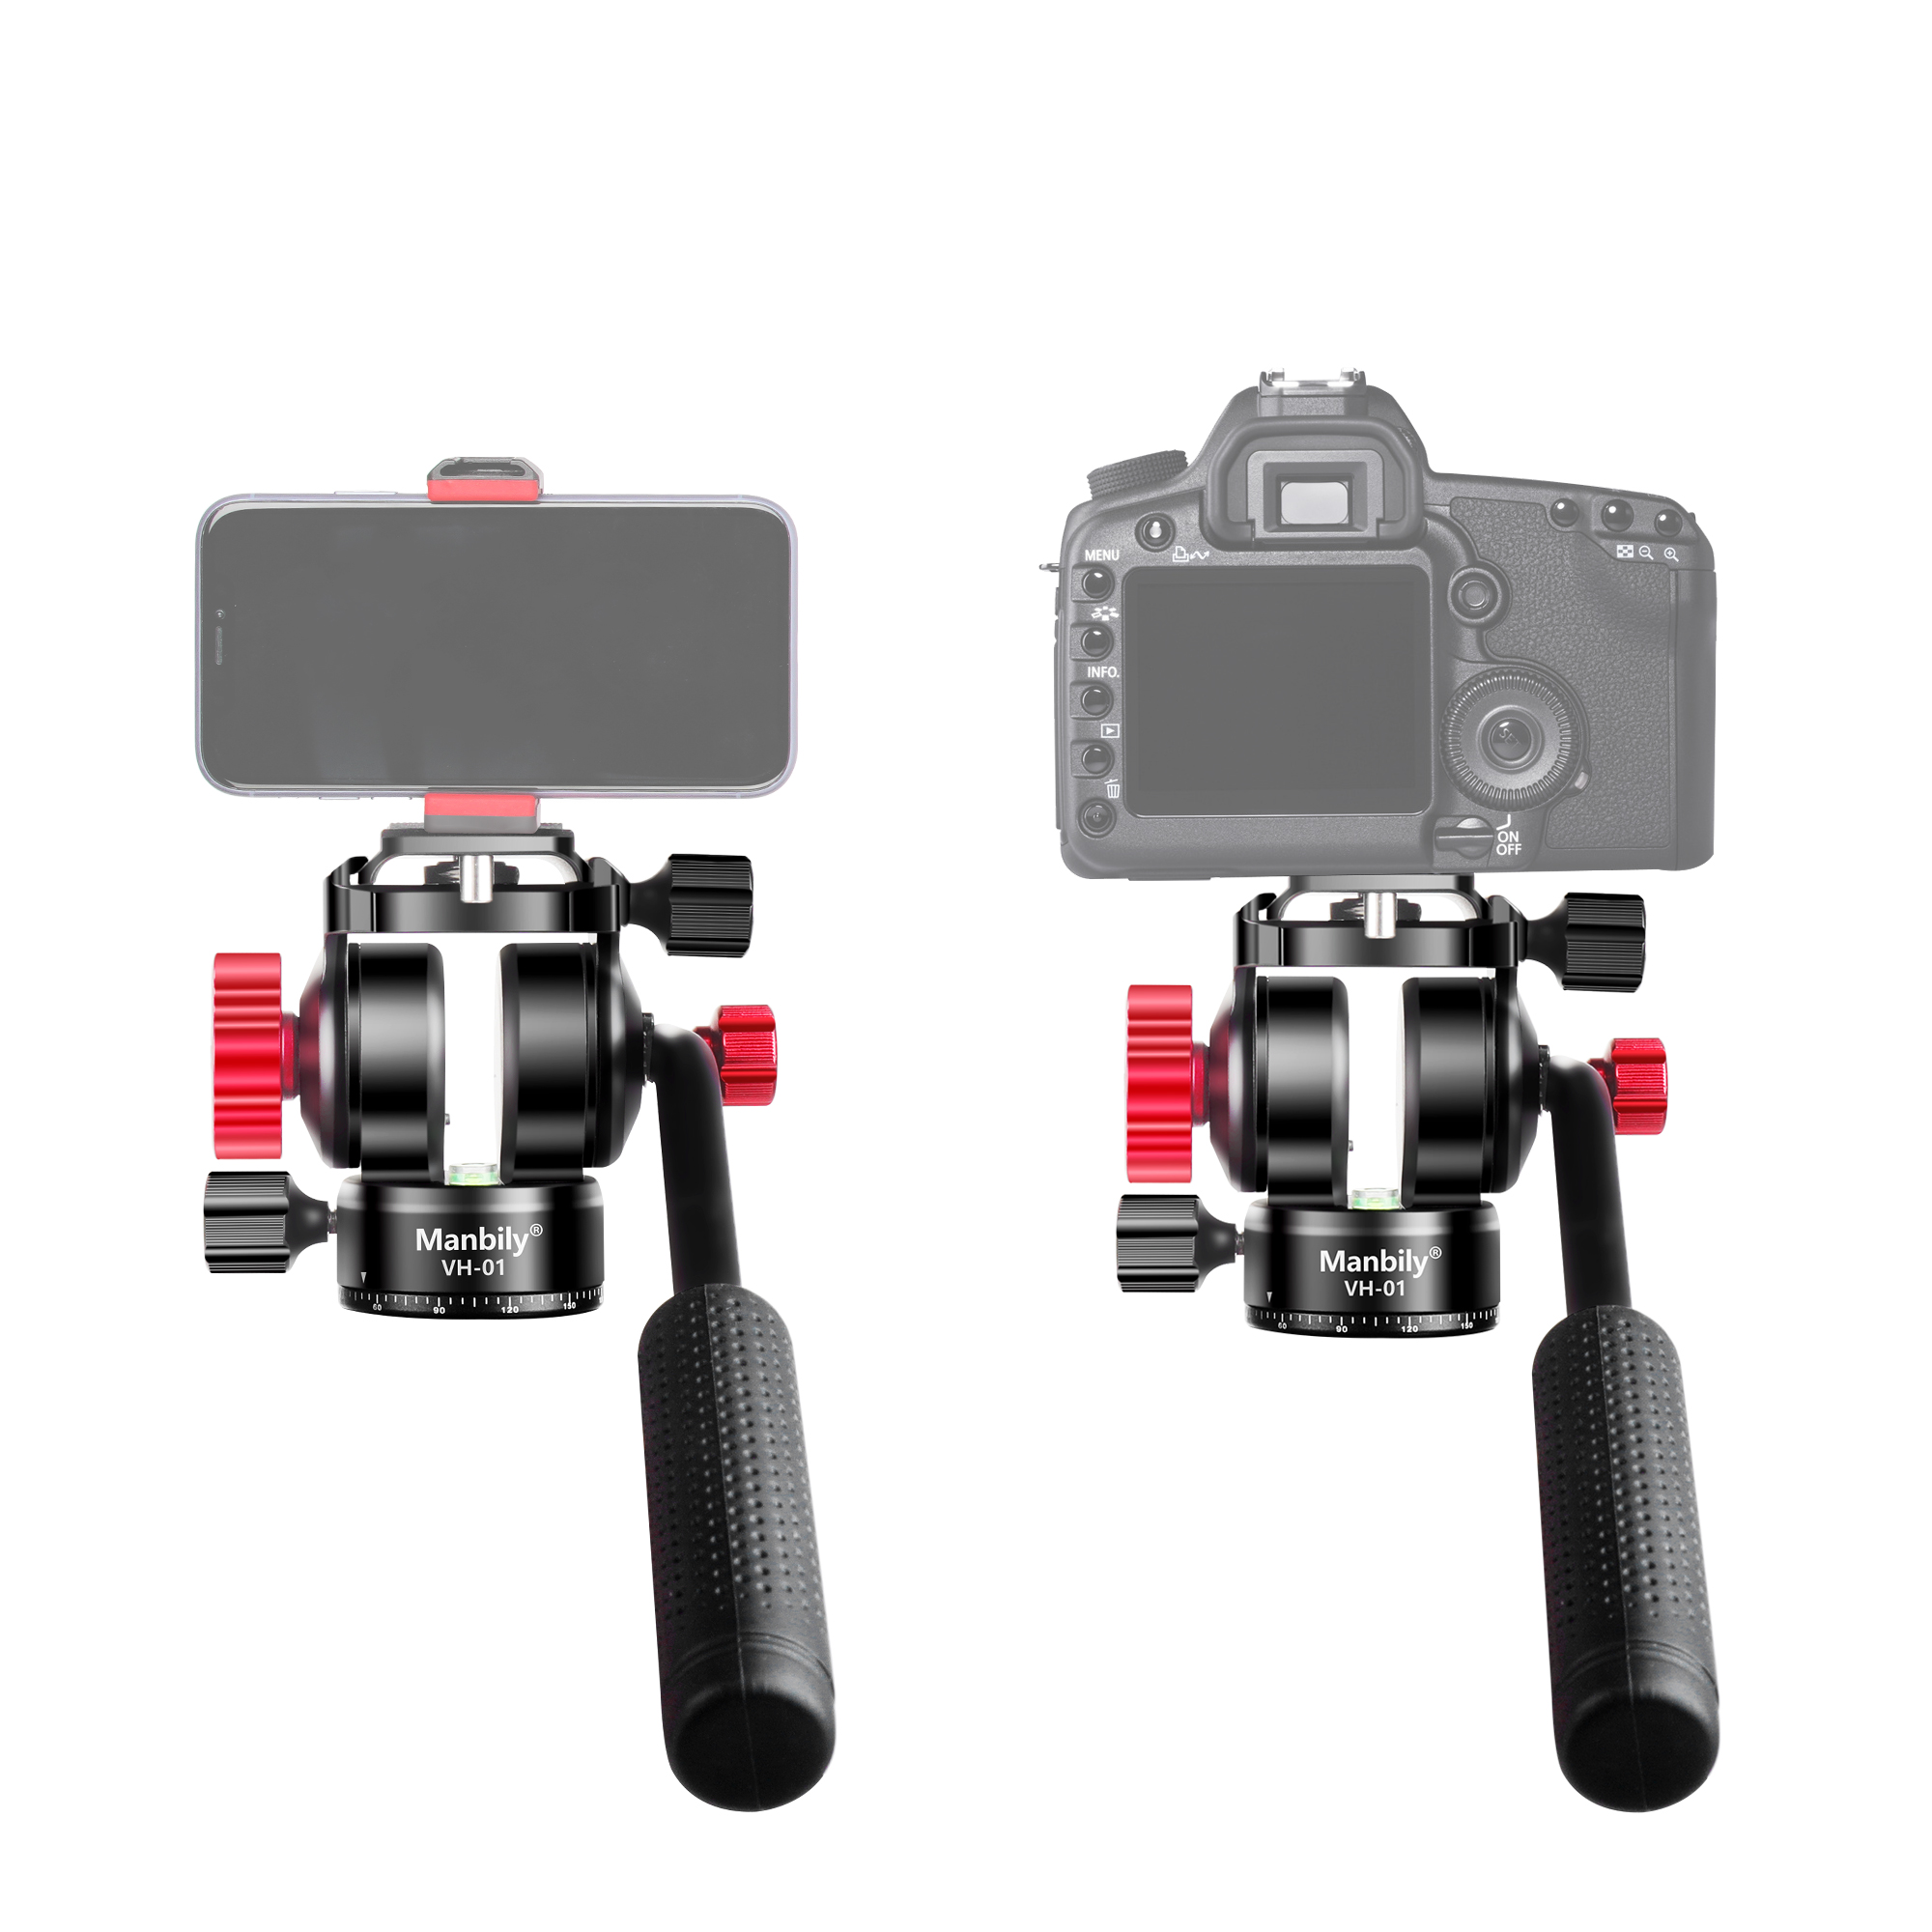 Manbily Video Fluid Head, Video Head for Compact Video Cameras and DSLR Cameras, for Filming, Videography, Vlogging, Live Streaming